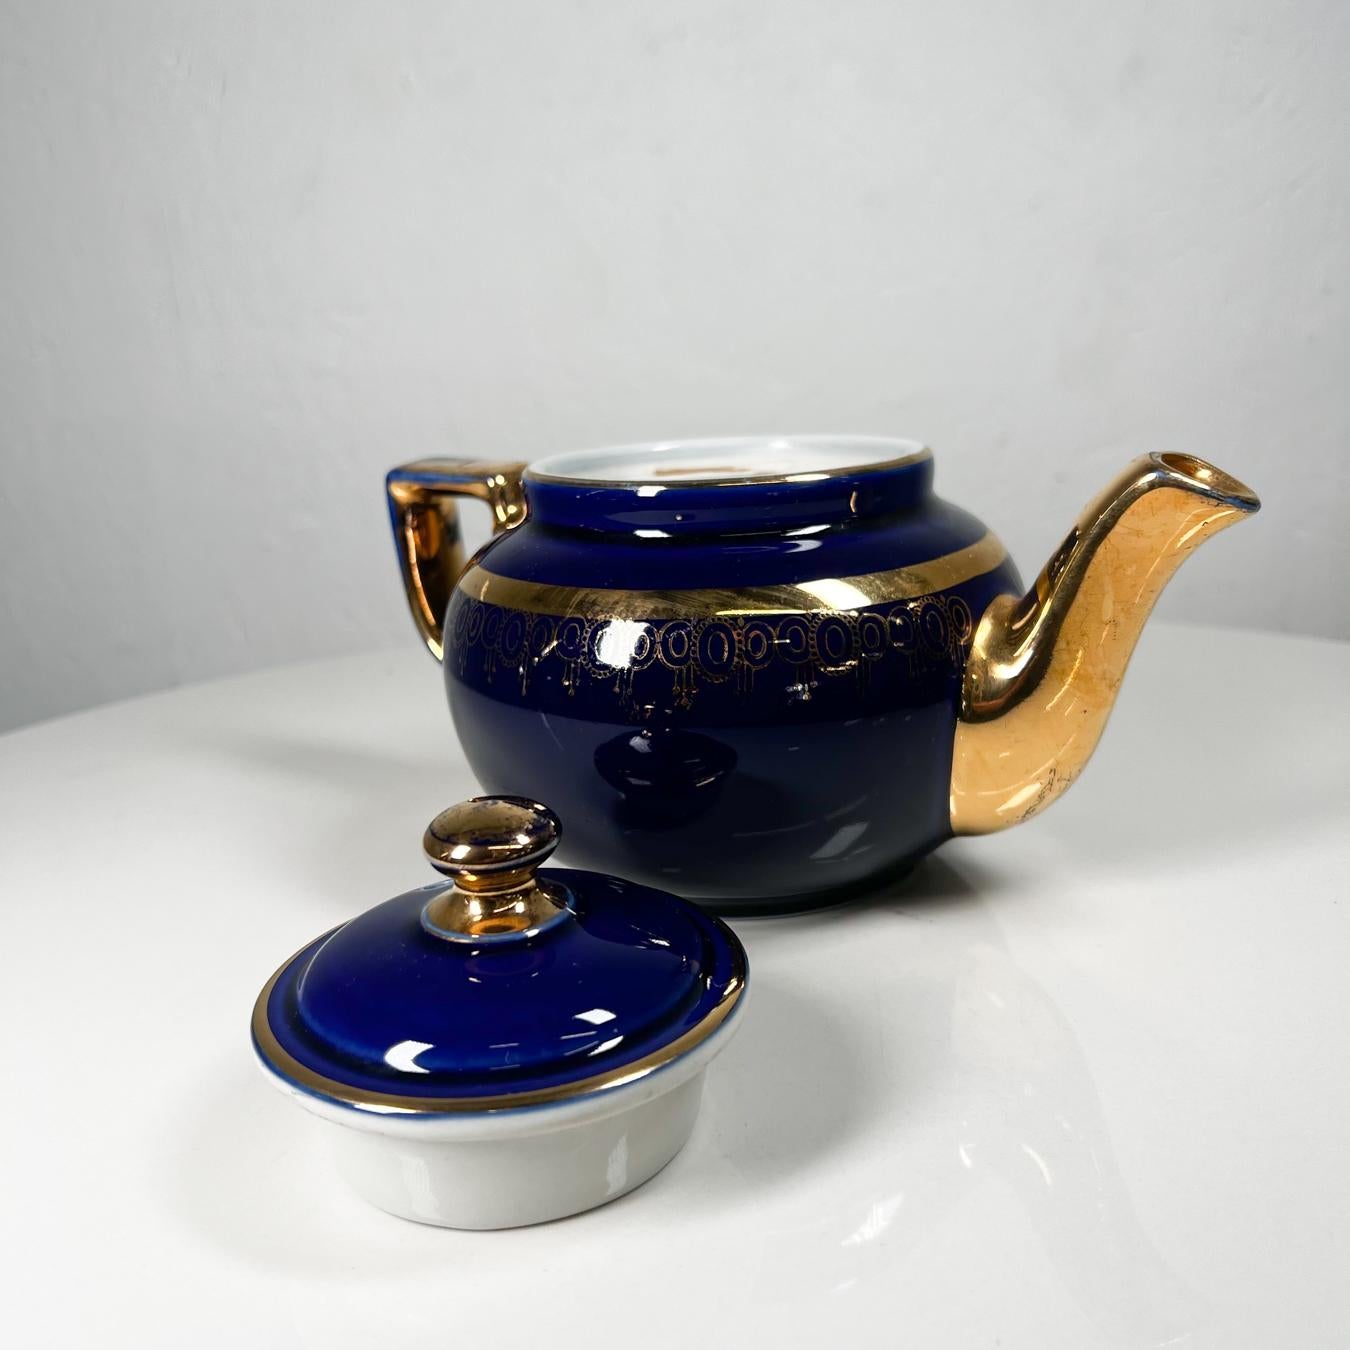 Mid-20th Century 1950s Modern Decorative Cobalt Blue and Gold Hall China Tea Pot USA For Sale